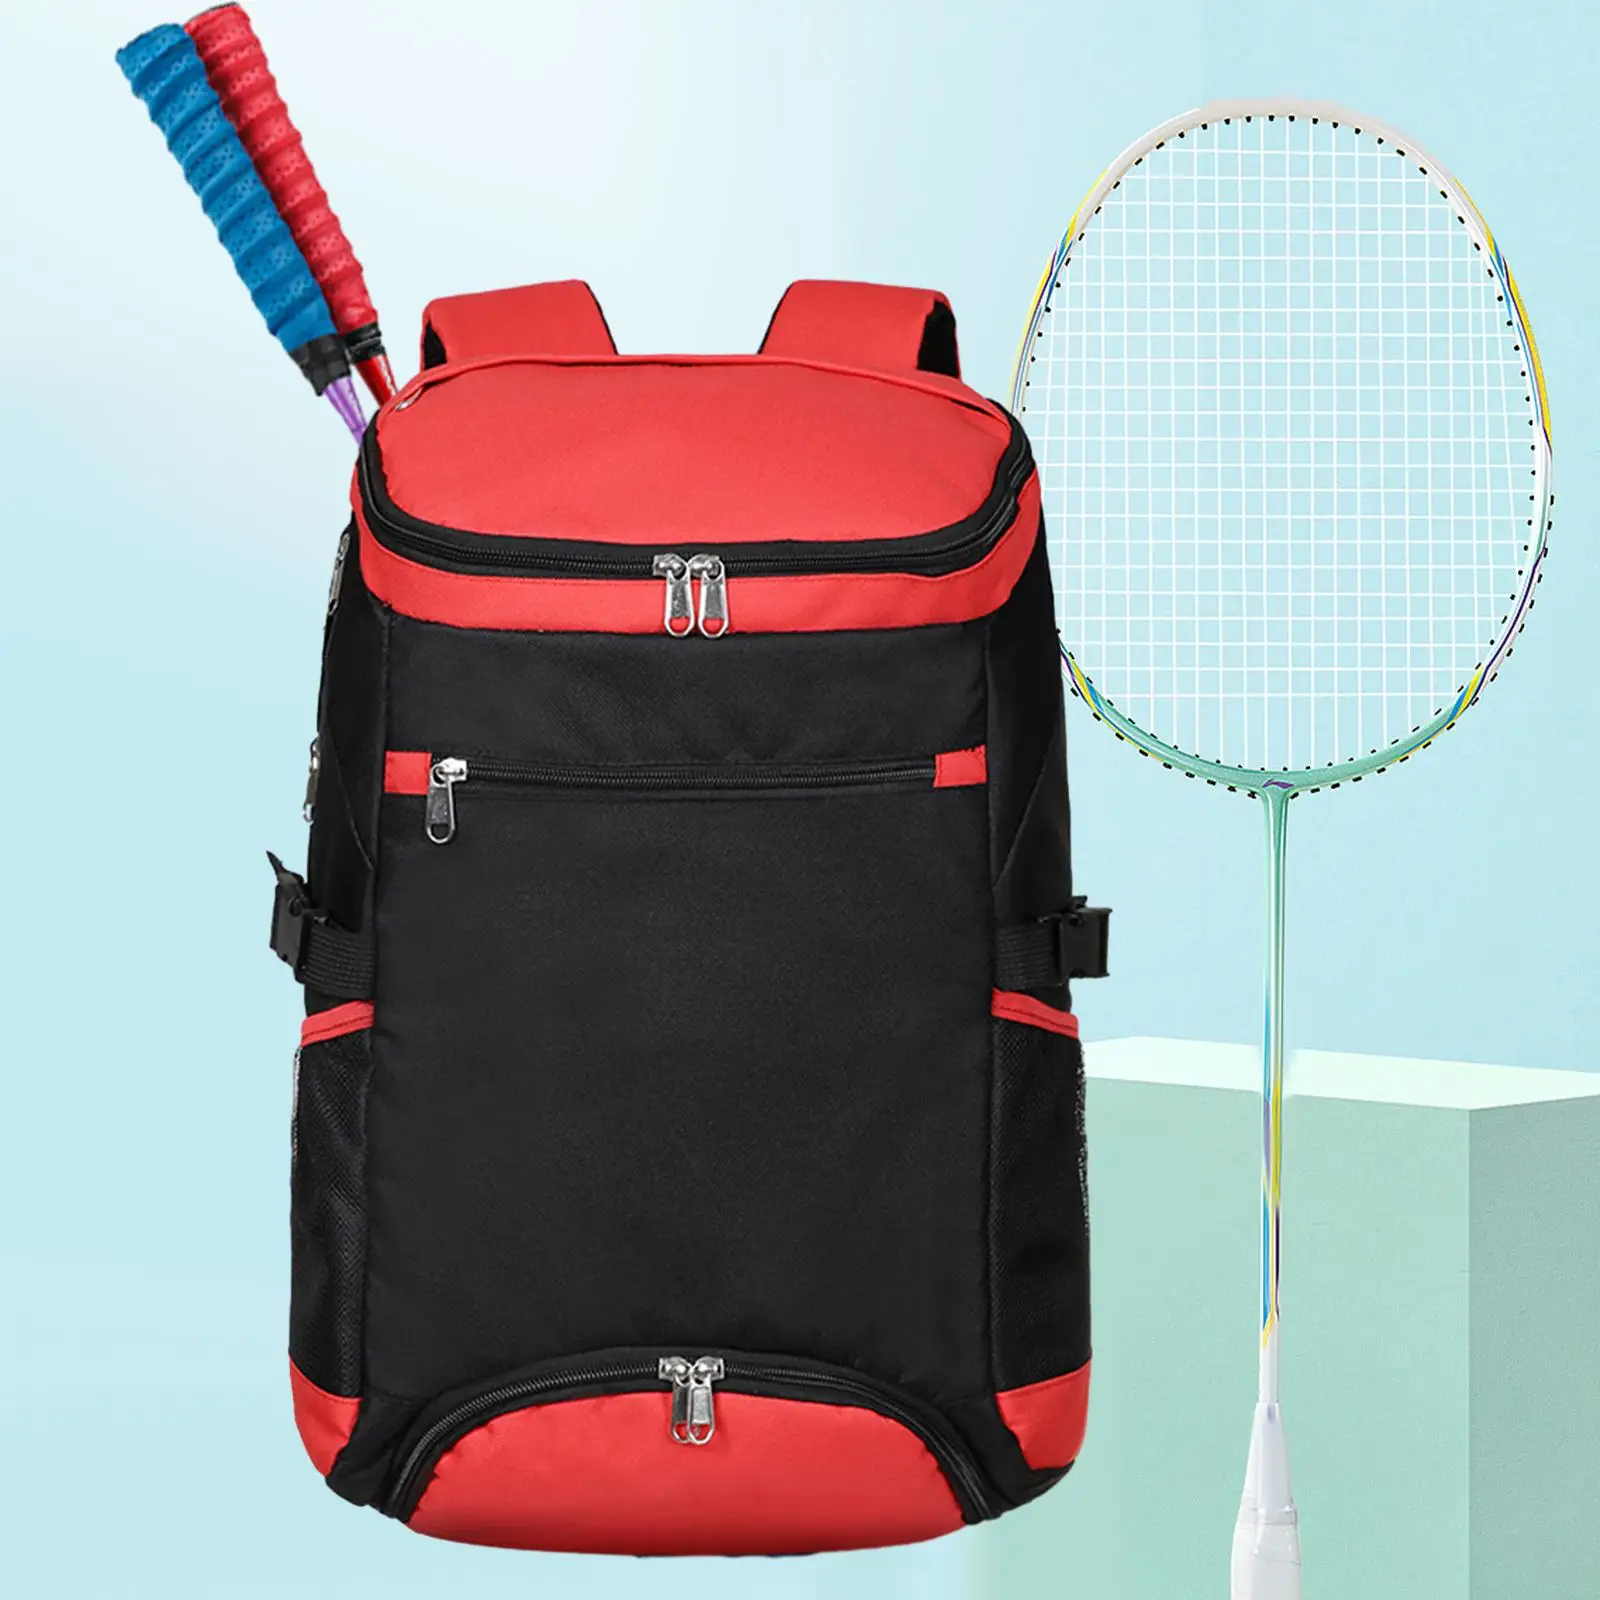 Tennis Backpack Backpack for Outdoor Sports Badminton Squash Racquets